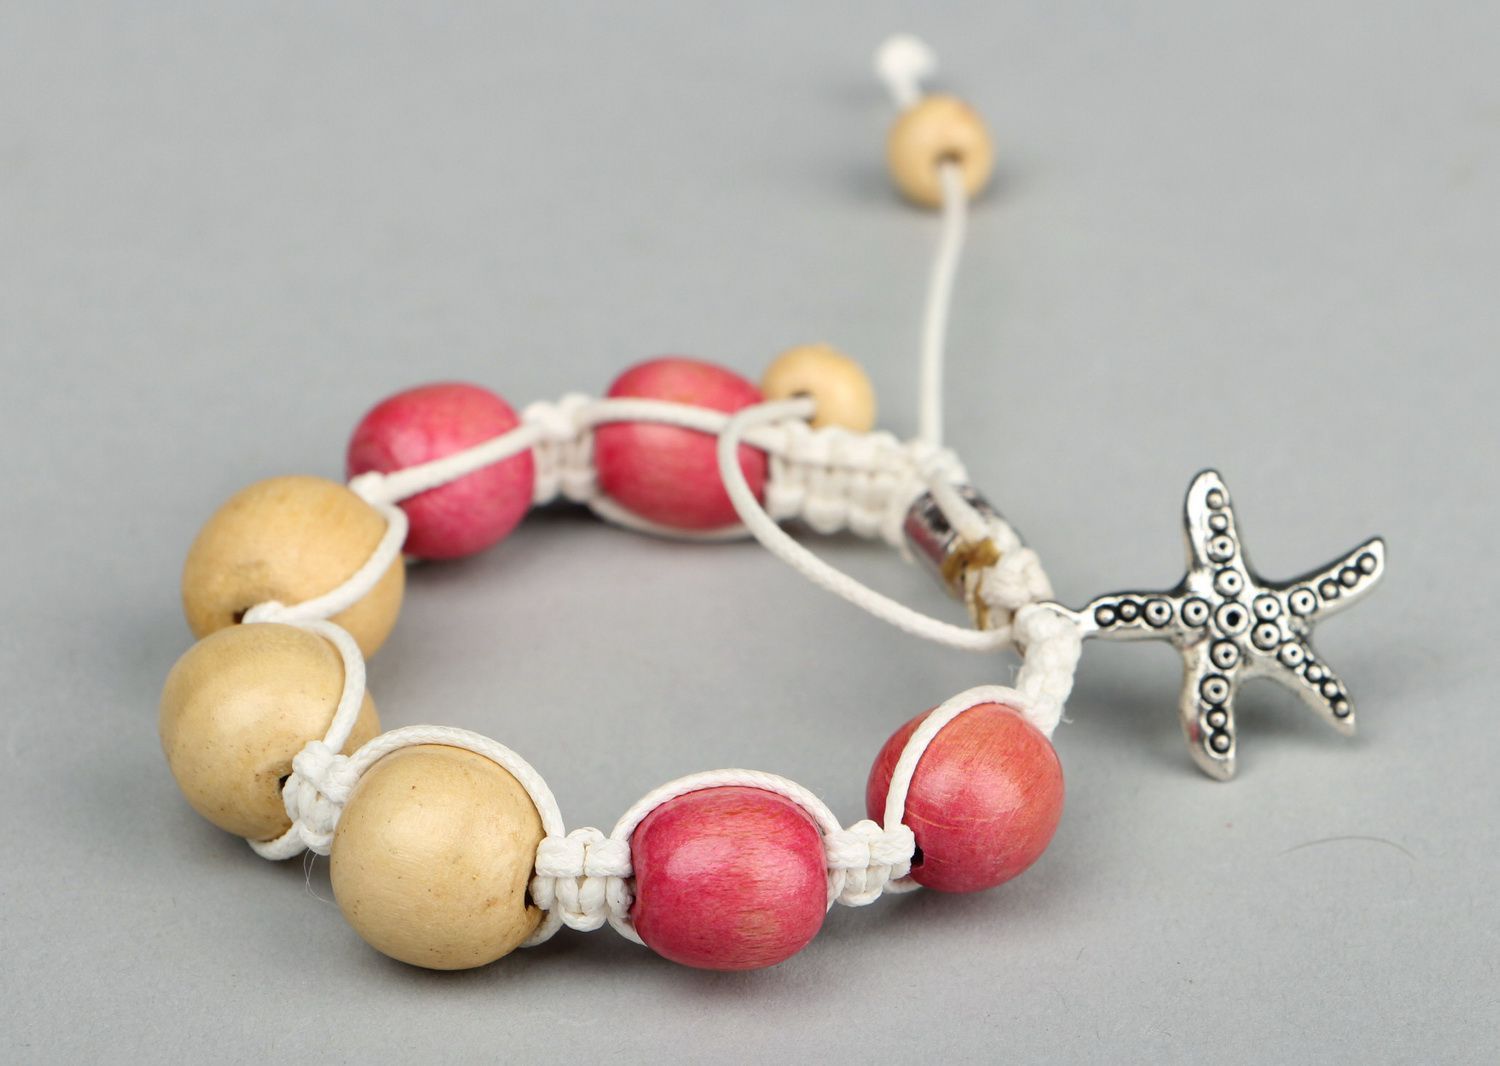 Bracelet made of wooden beads photo 2